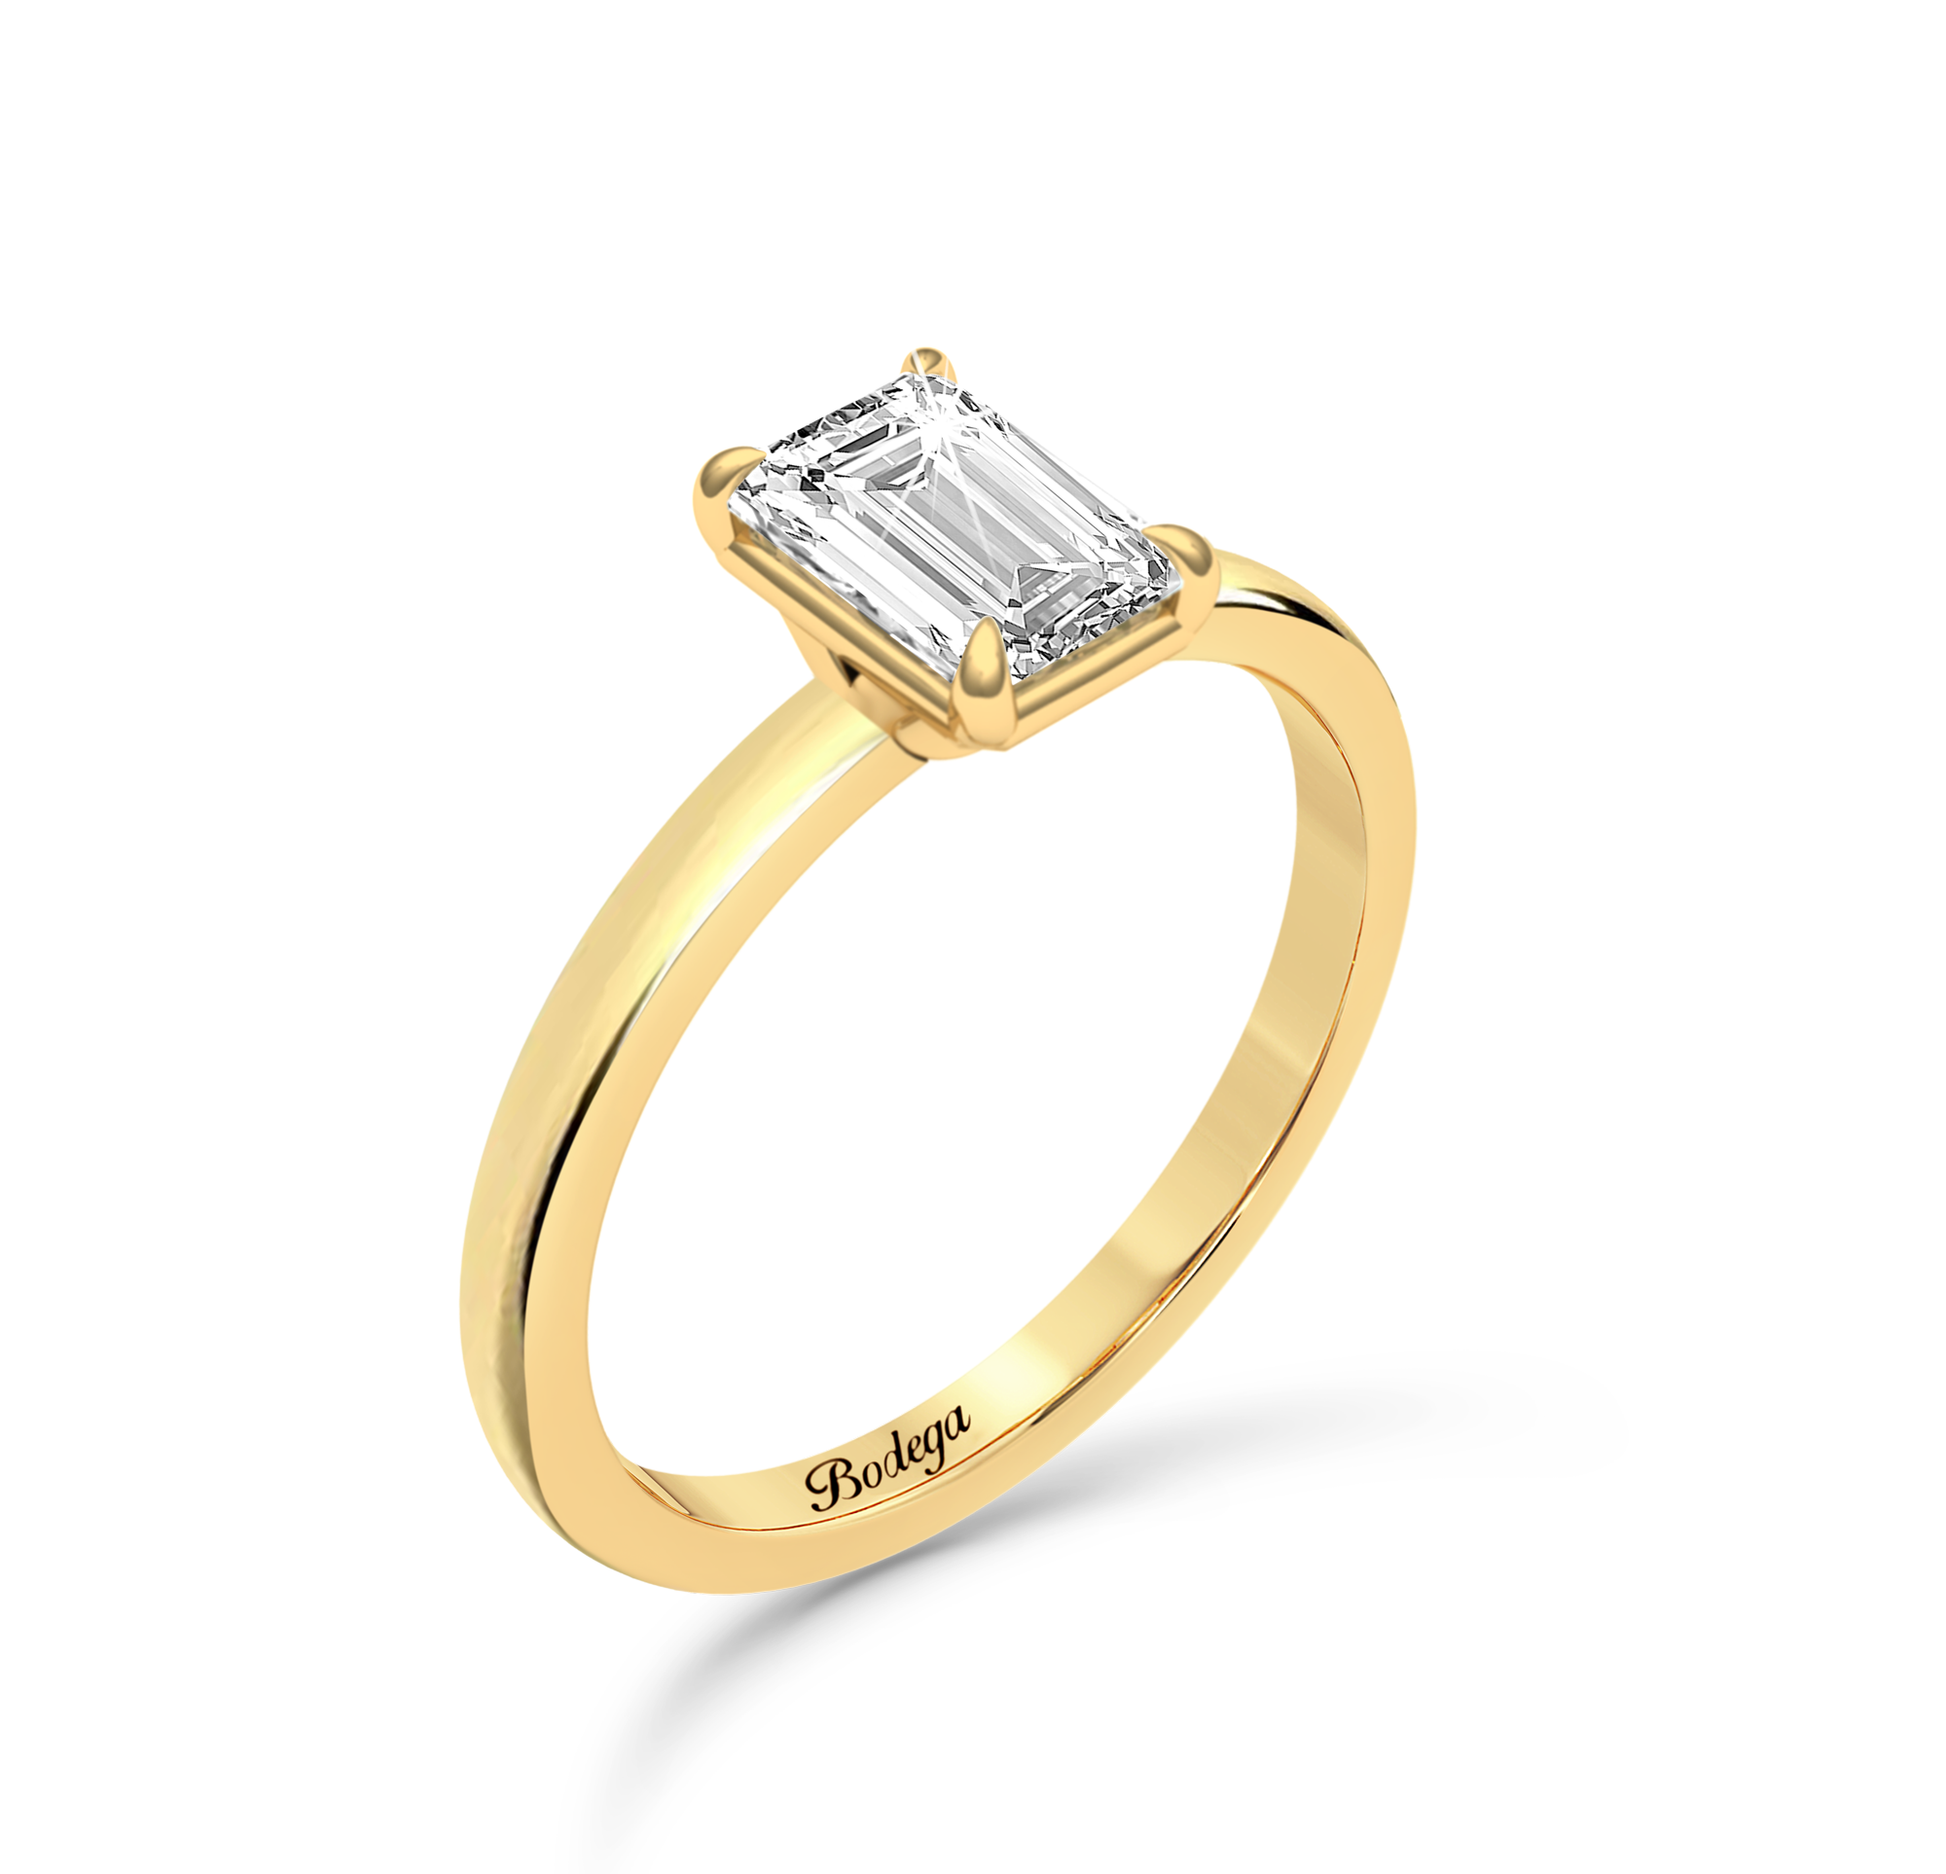 Radiant Cut Solitaire Ring in flush setting - Yellow Gold - Bodega